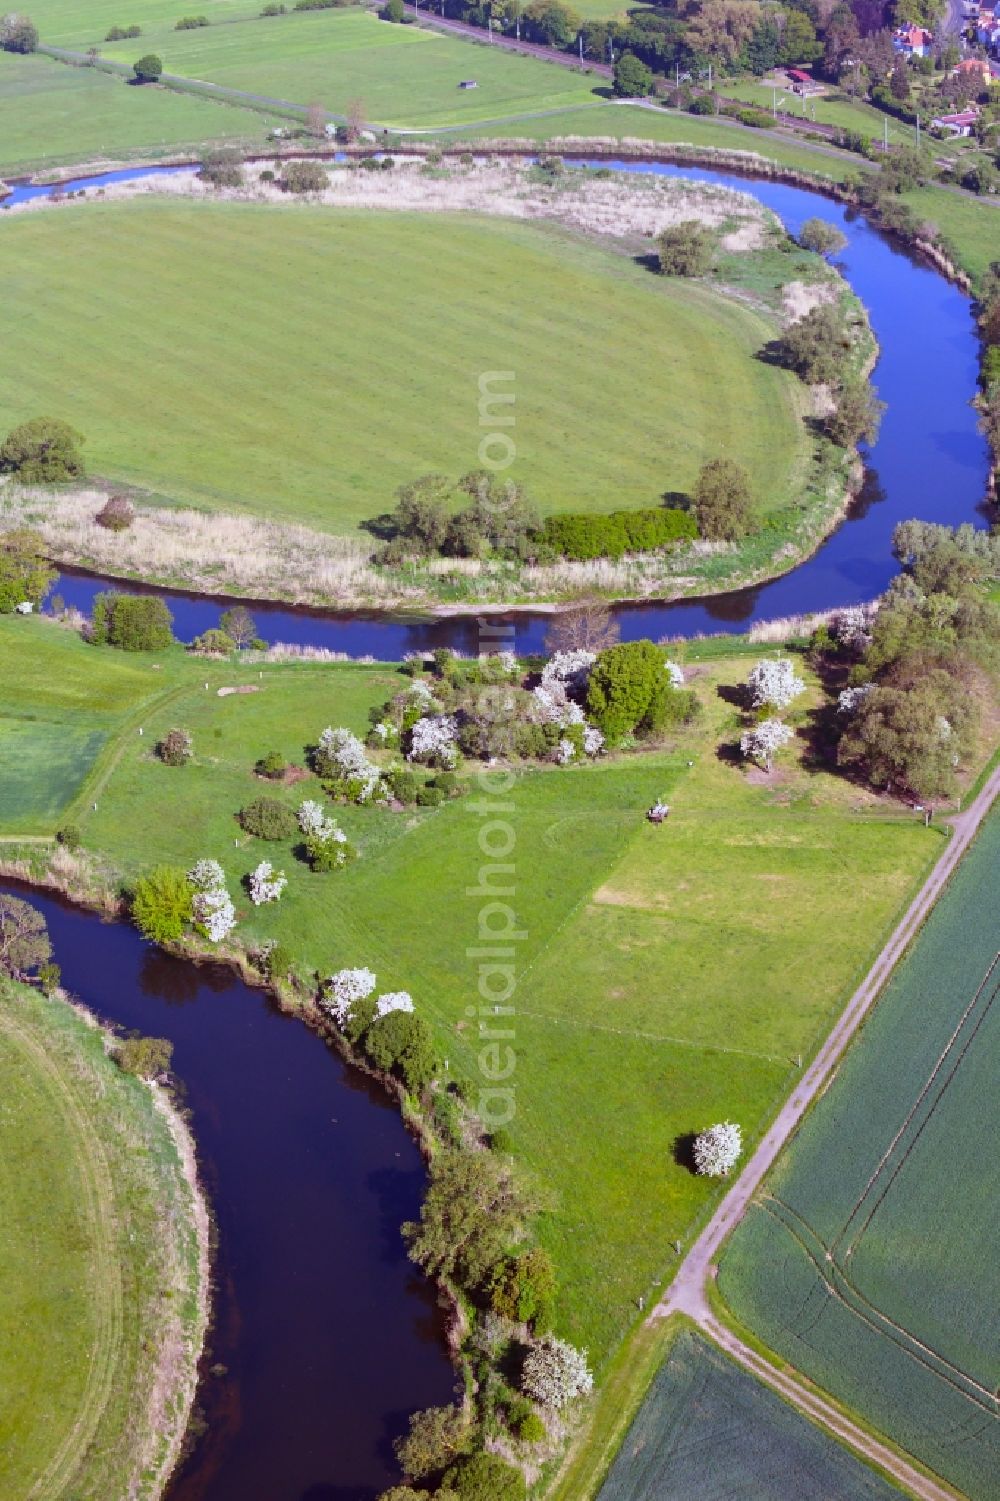 Aerial photograph Göringen - Curved loop of the riparian zones on the course of the river Werra - in Goeringen in the state Thuringia, Germany